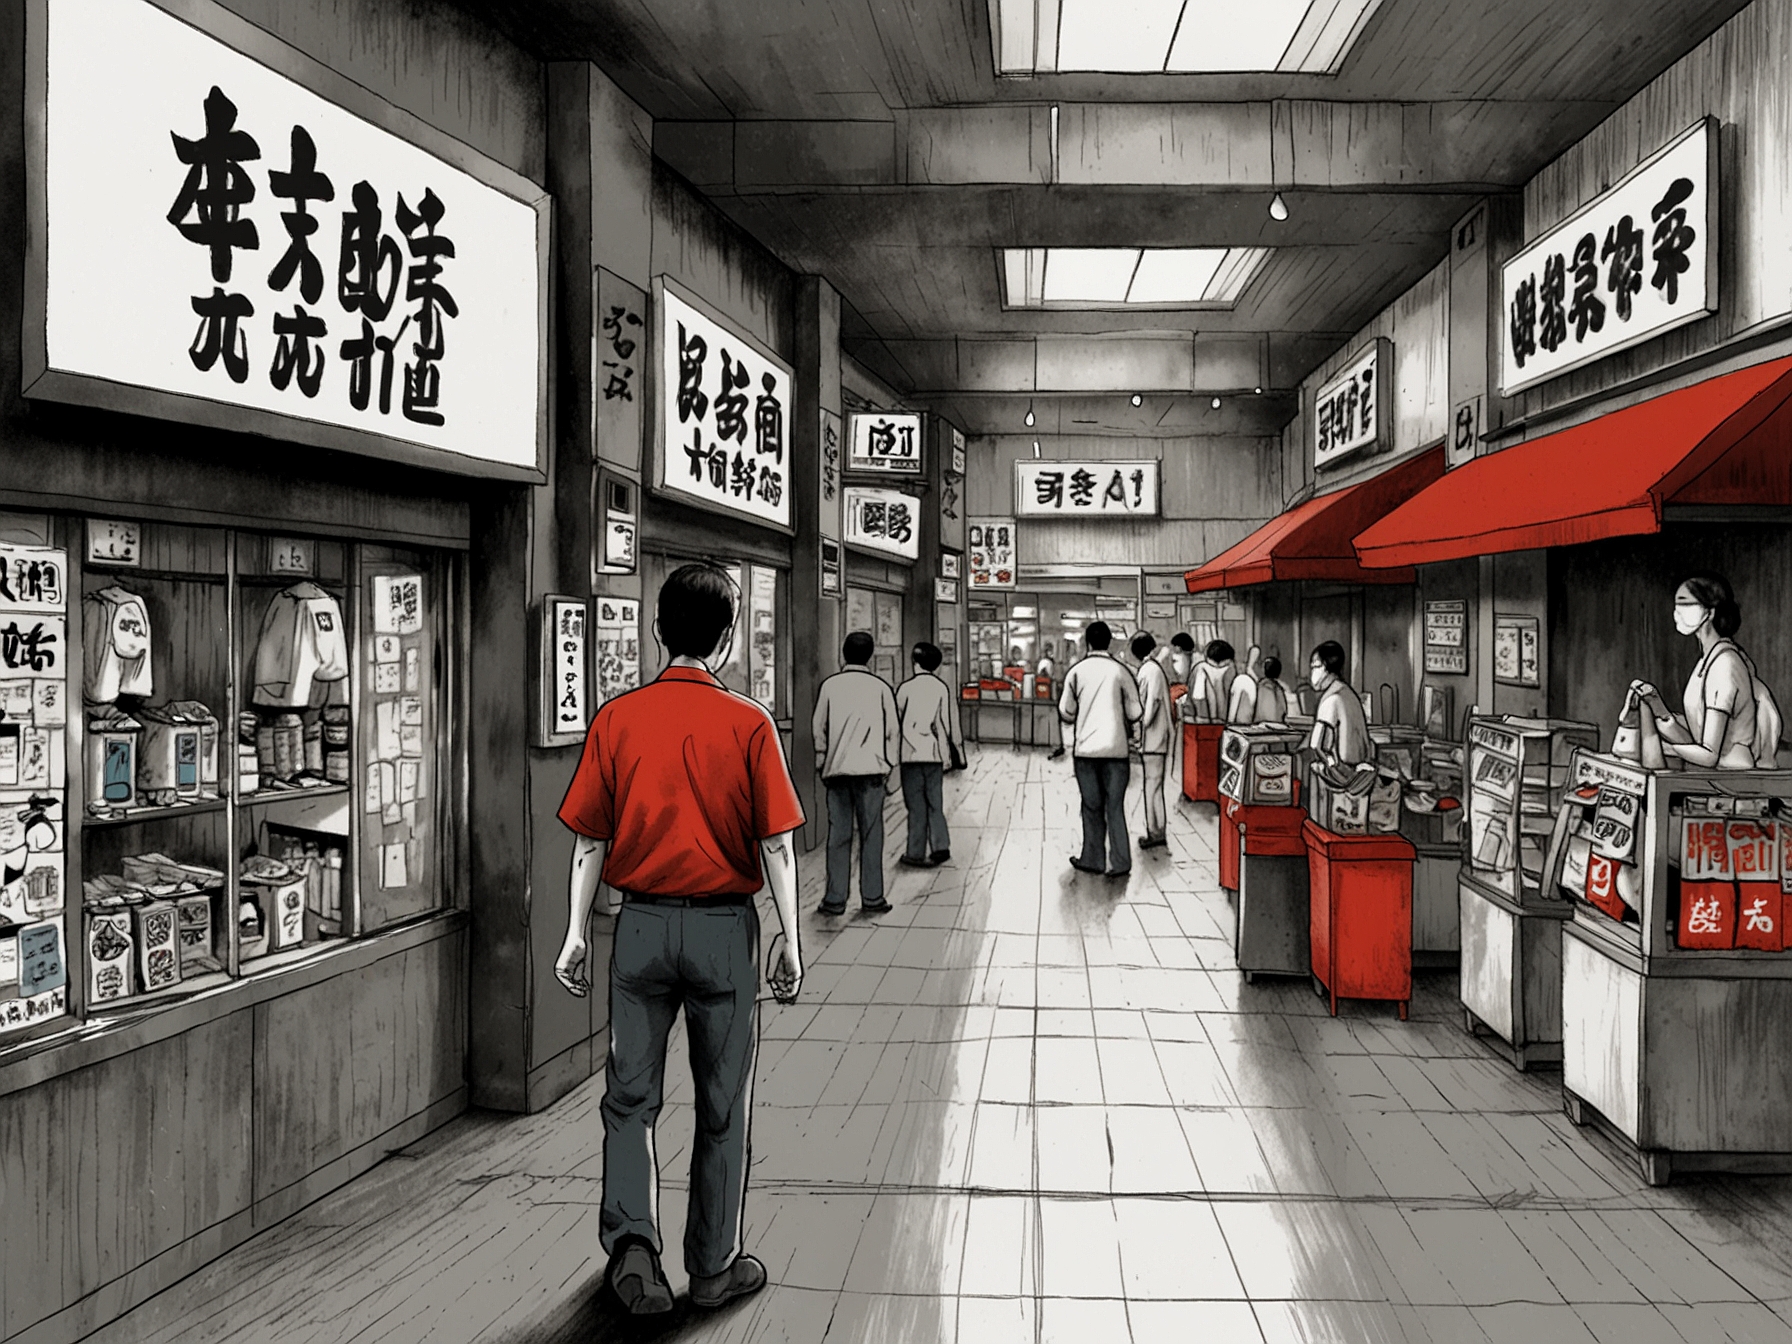 A scene depicting Japan's services sector, showing empty retail stores and hospitality venues suffering from pandemic-related restrictions, causing a continued contraction in June.